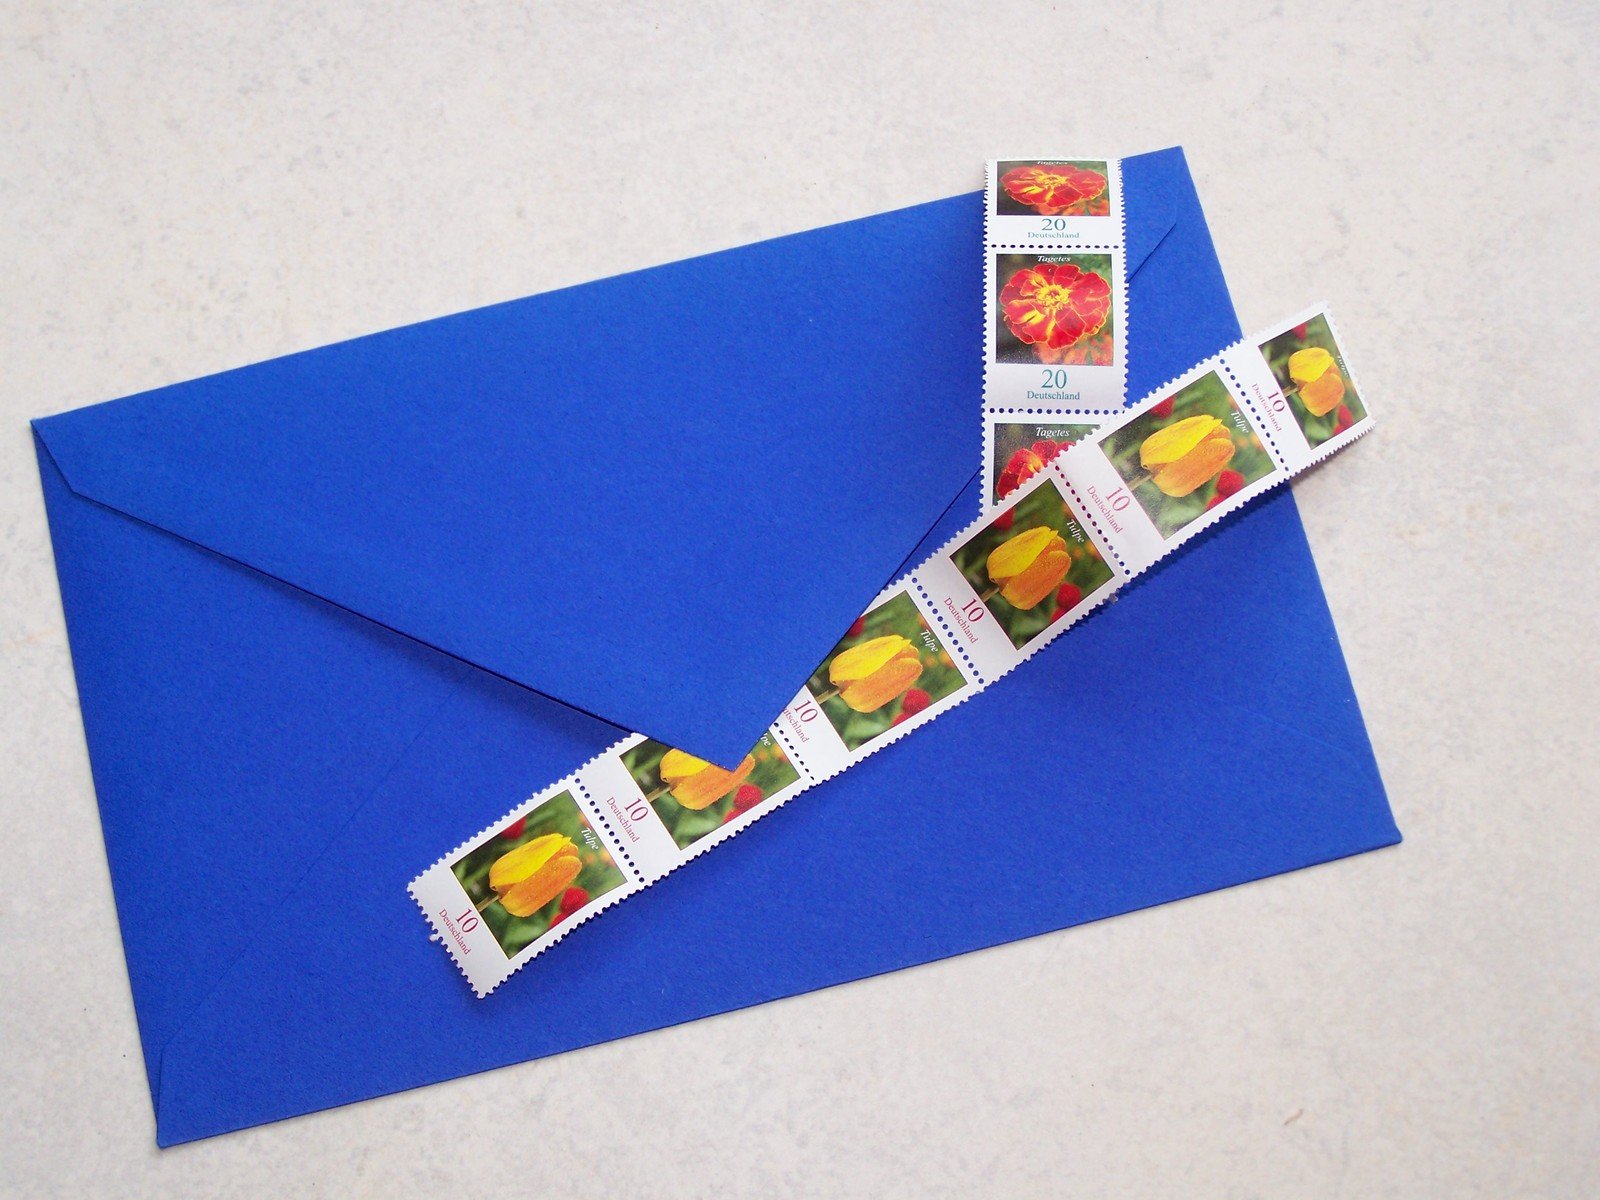 a close - up of a blue envelope containing postage stamps